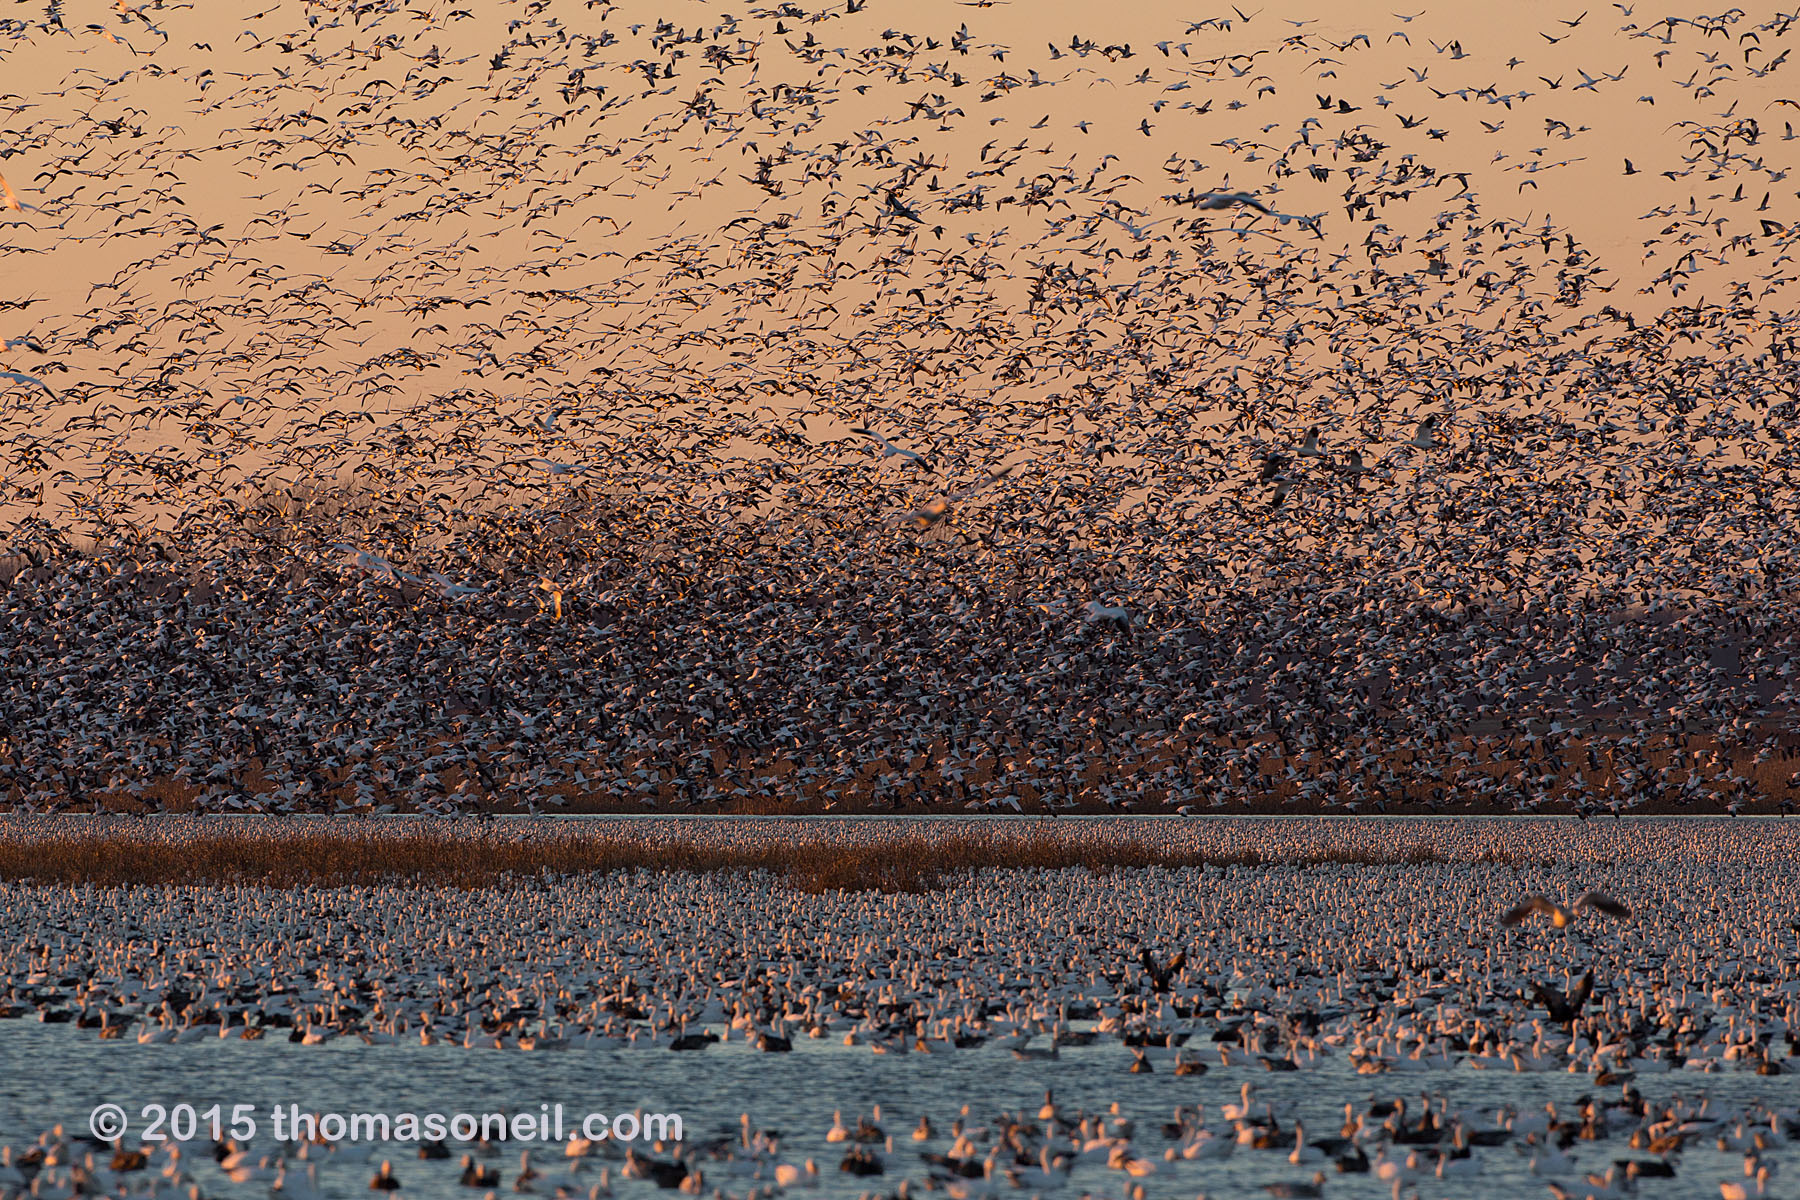 Snow geese, Squaw Creek NWR, Missouri.  Click for next photo.